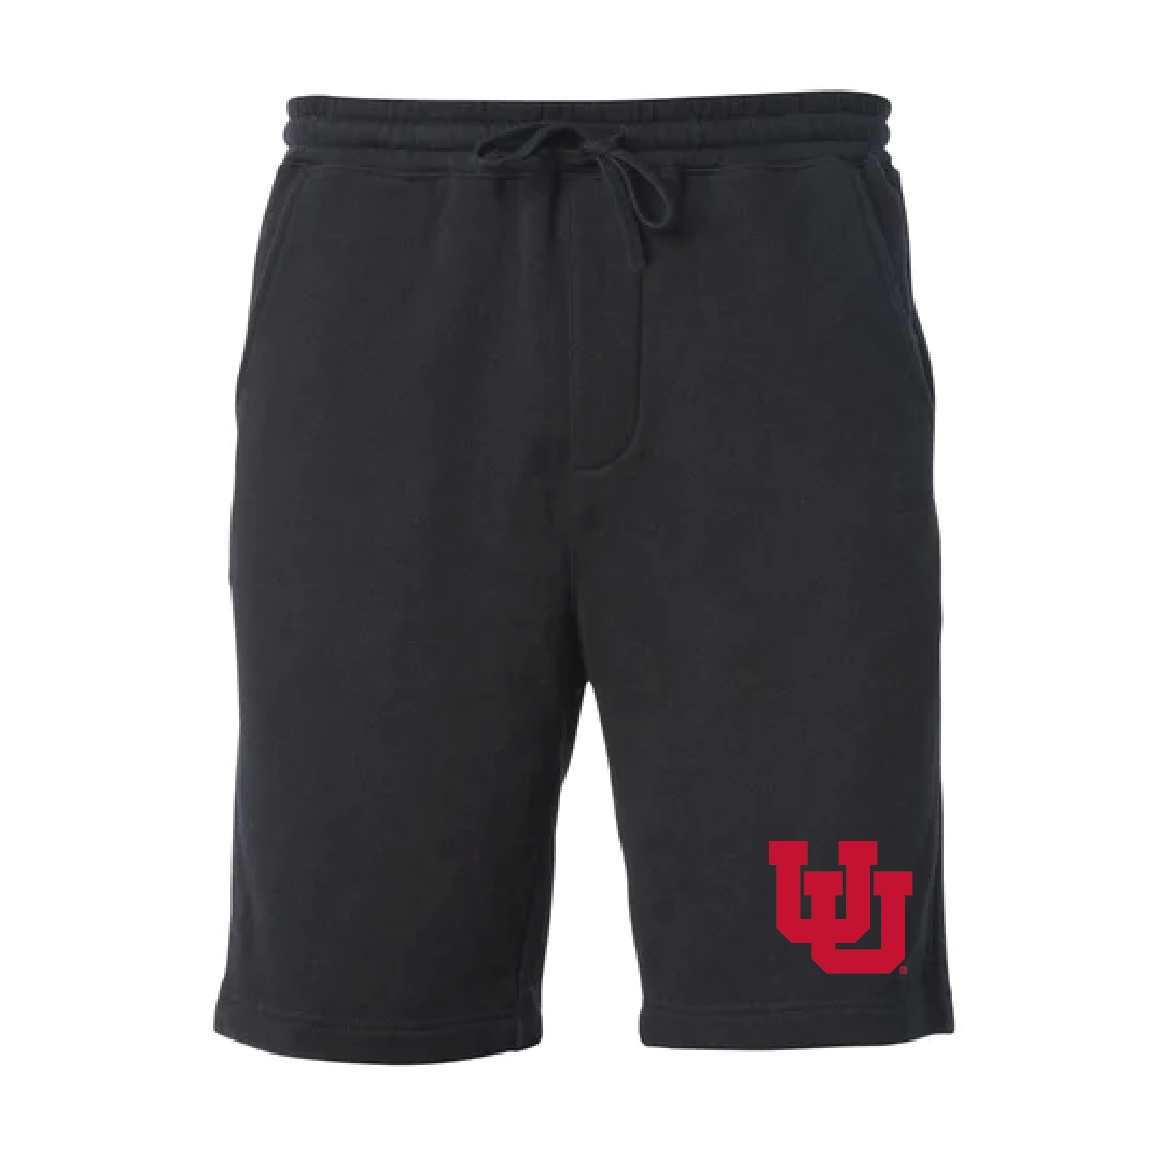 Youth Midweight Fleece Black Shorts